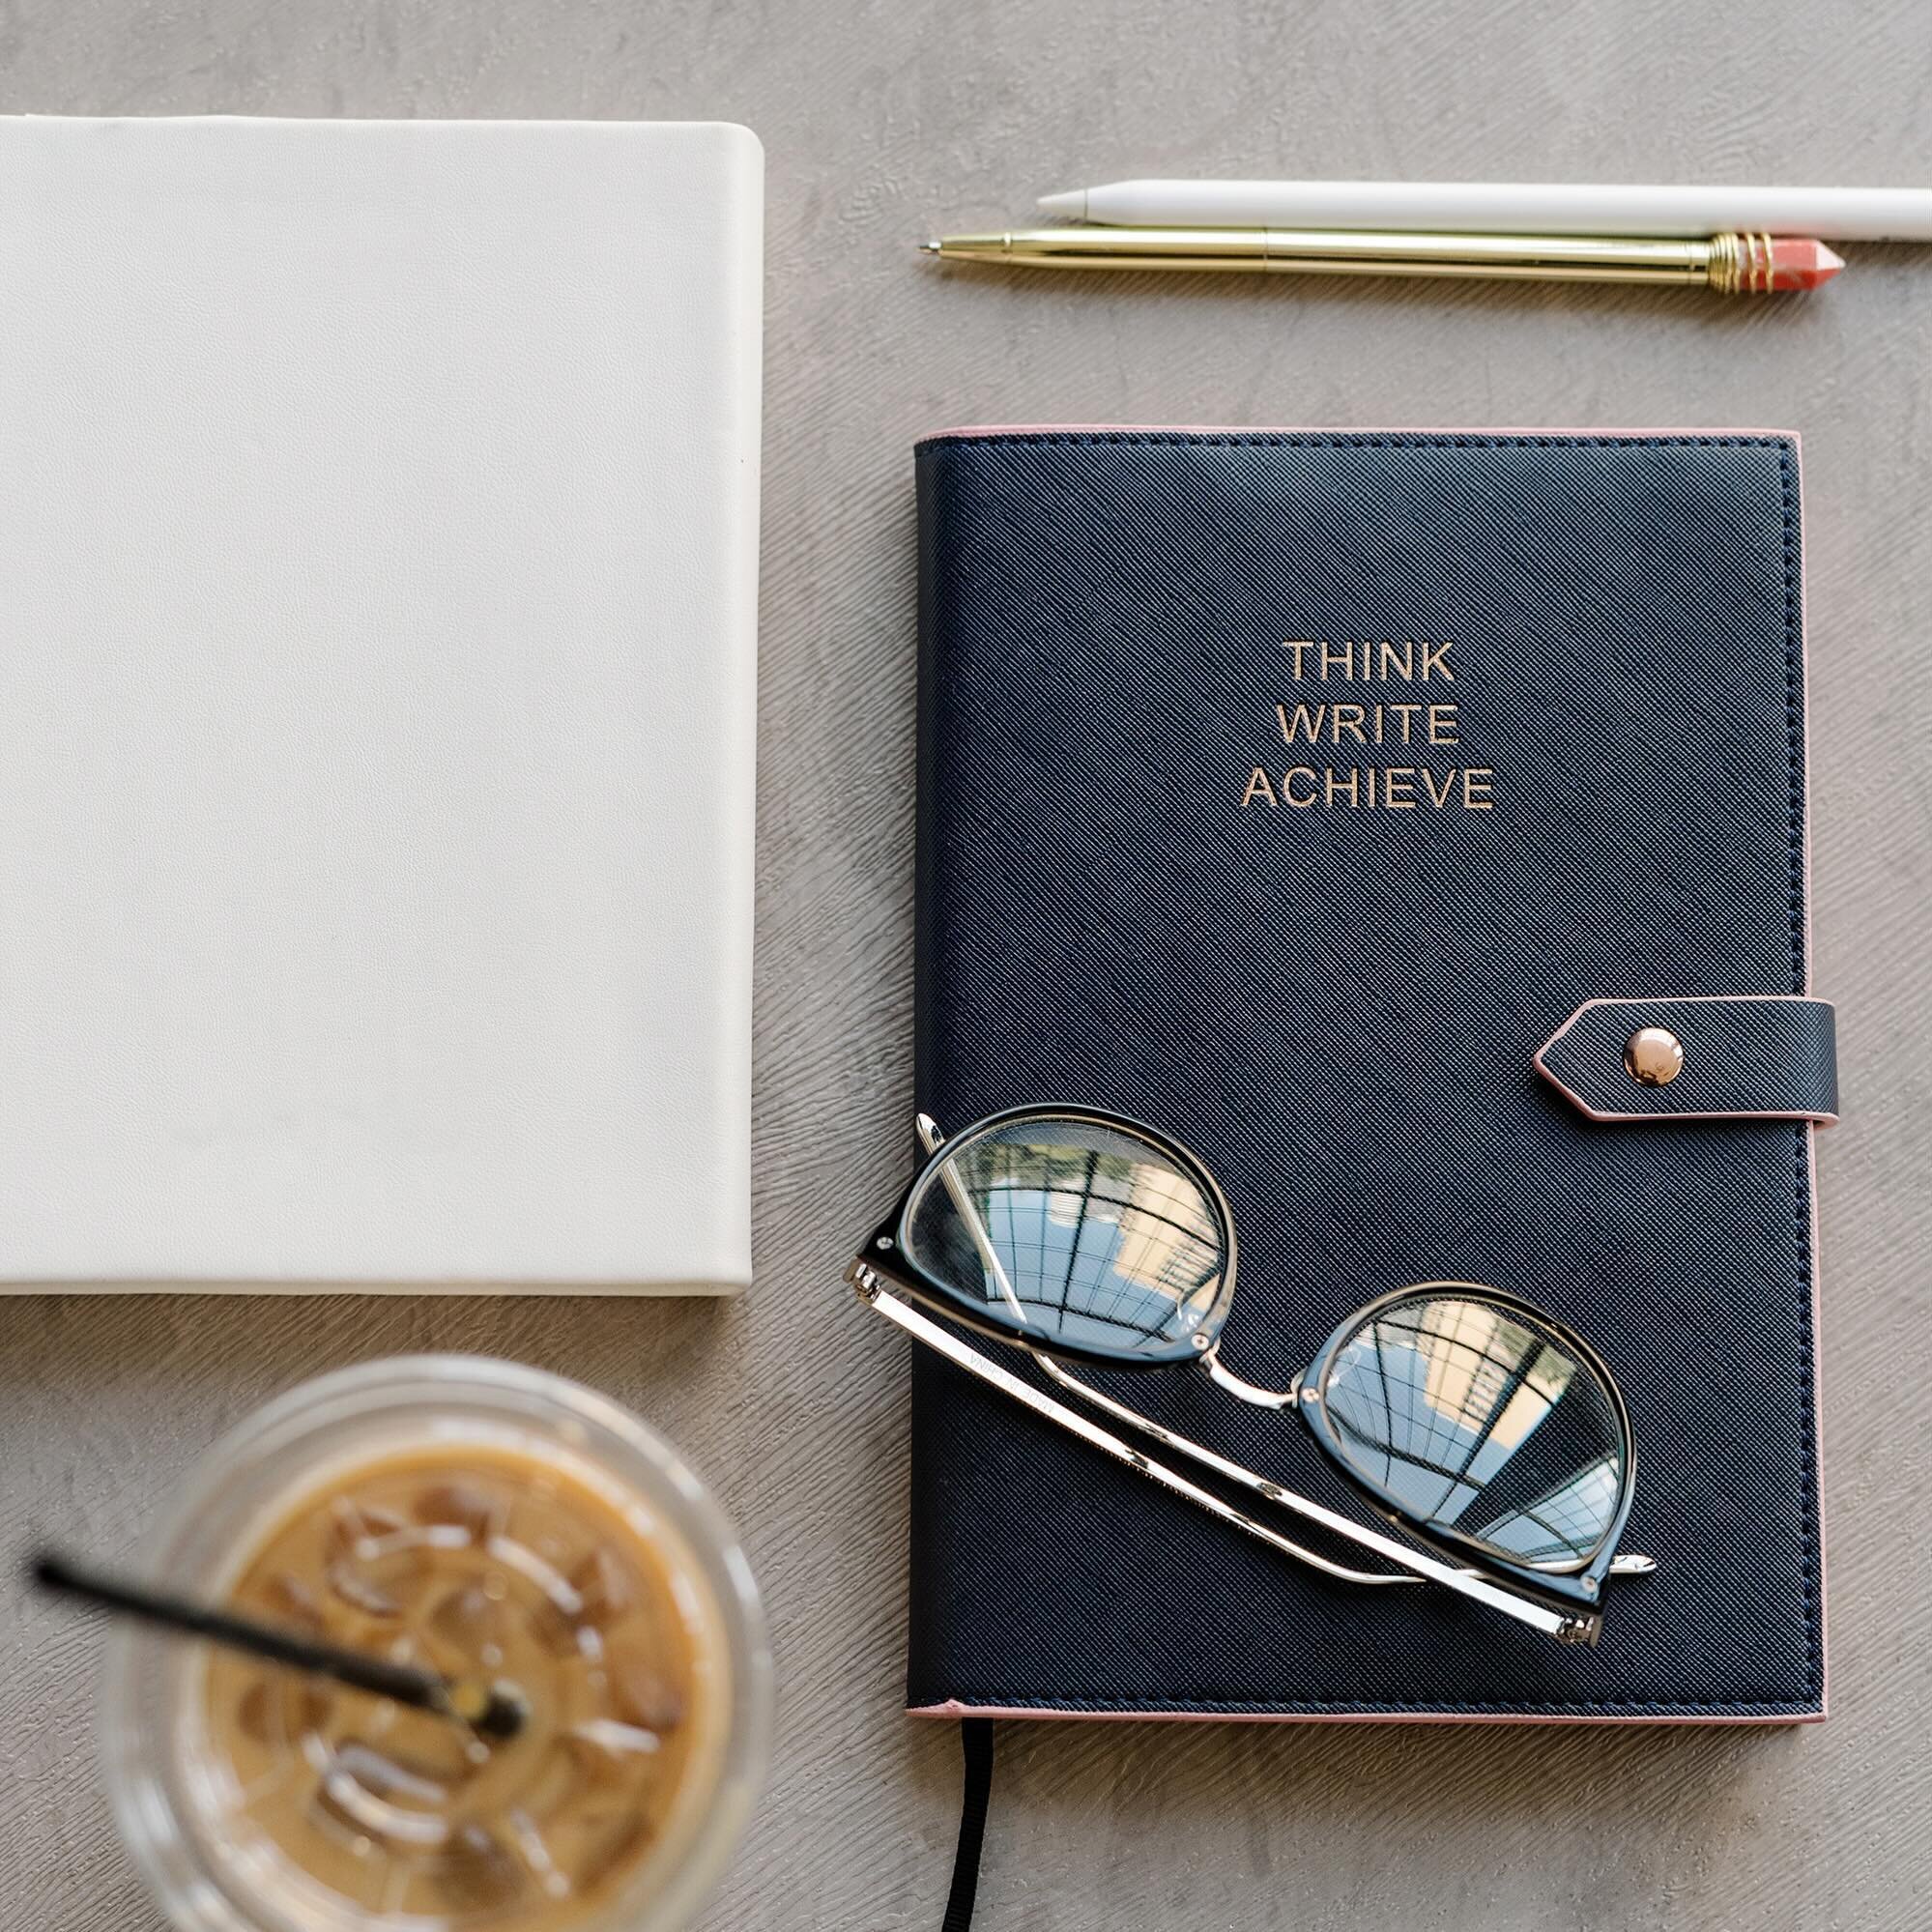 There are so many highs and lows to owning and running my own business as a coach and author, but my favourite aspect is the flexibility to connect with my coaching clients on my schedule.

I can carve out time for writing (I&rsquo;m working on my ne